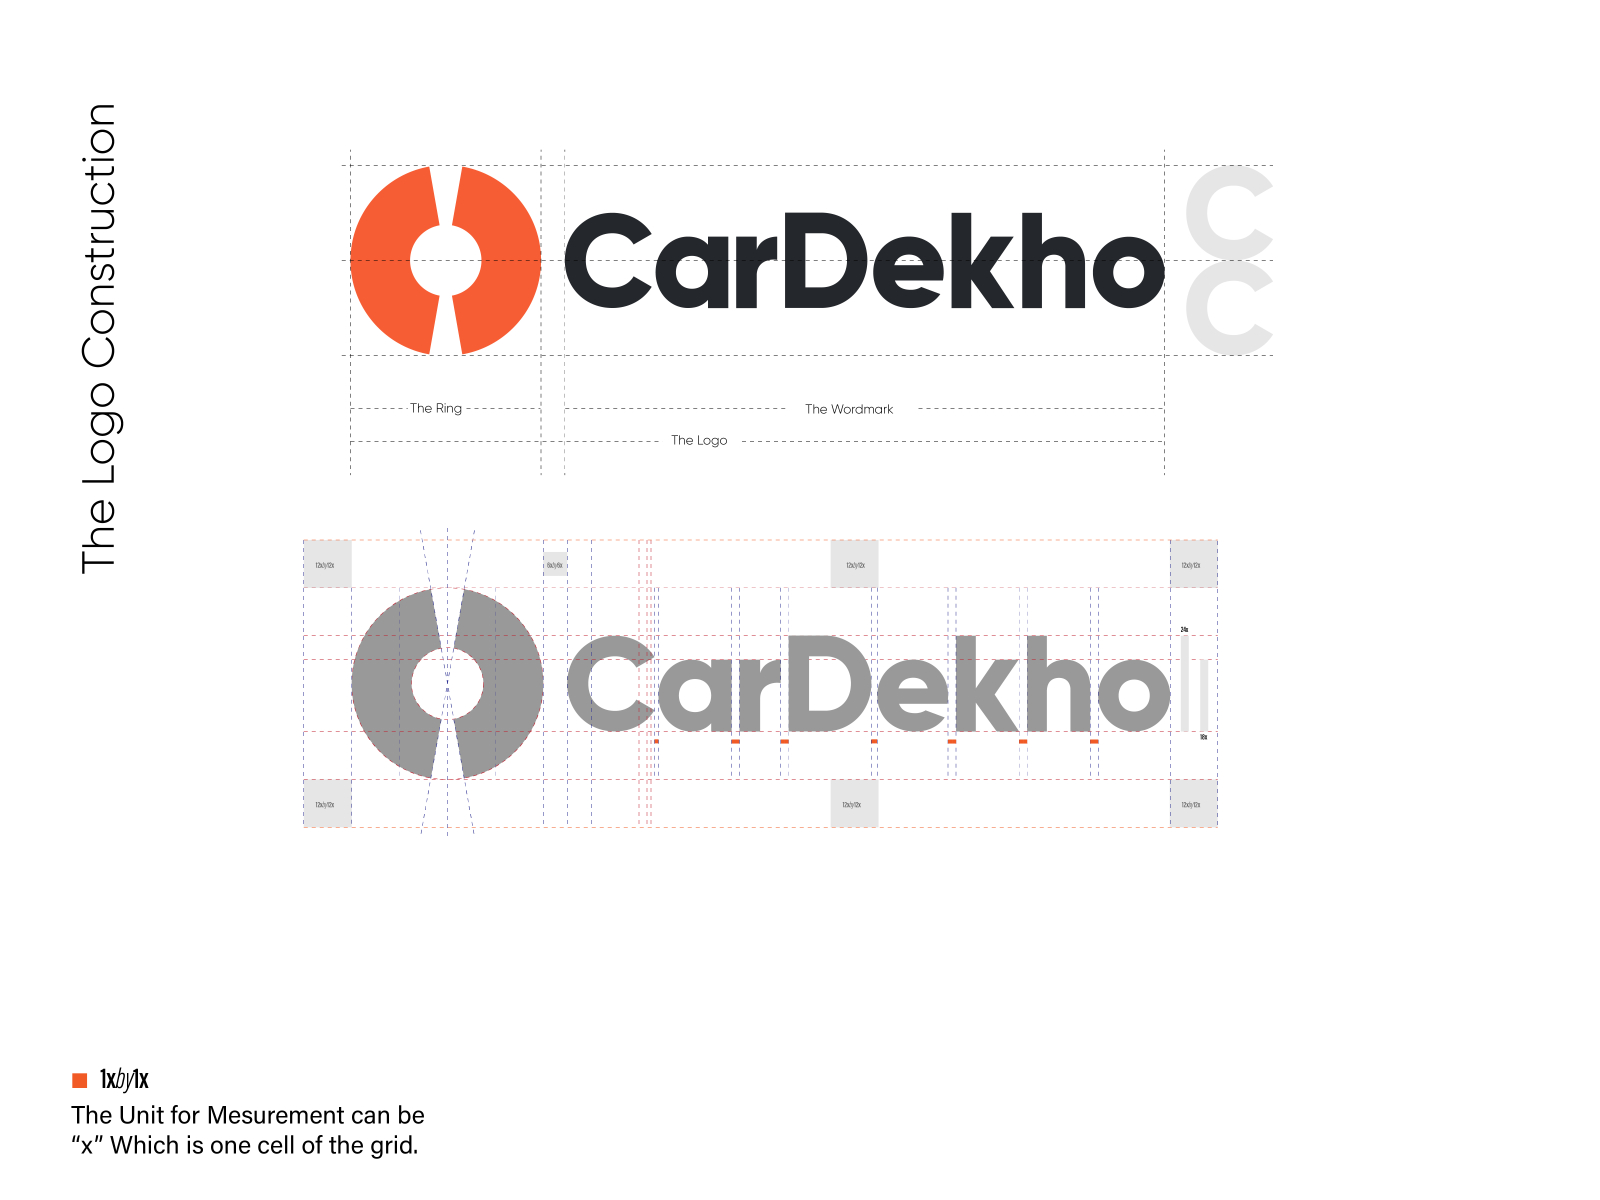 AI helps CarDekho deliver improved customer experience